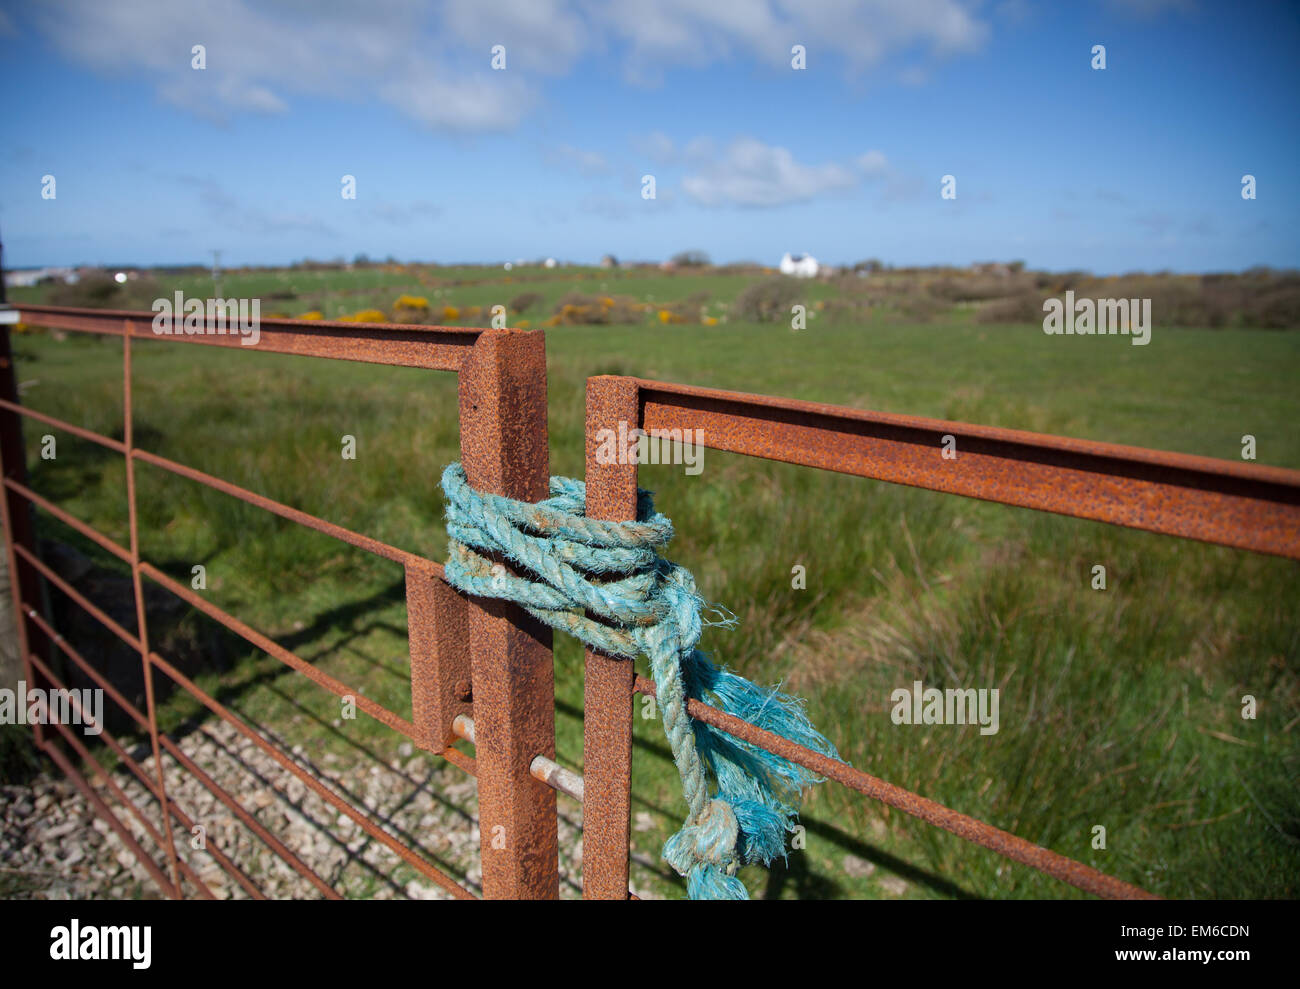 close-up creative shot of a pitted rusty farm gate tied shut with blue rope / twine with green grass and blue sky in background Stock Photo